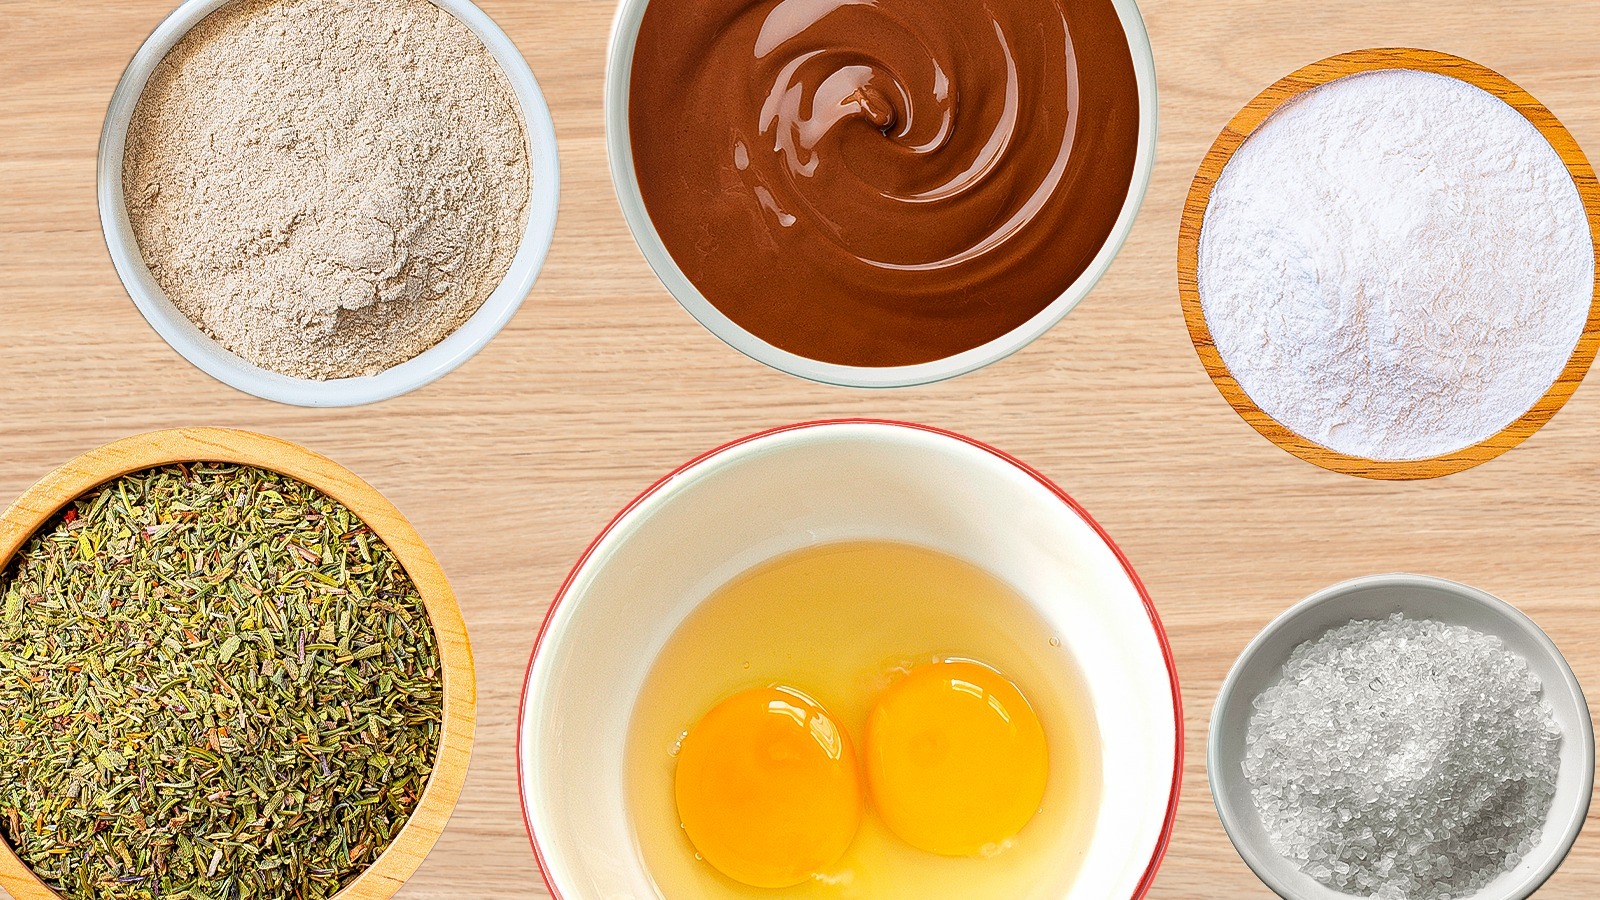 10 Baking Ingredients You Should Have On Hand